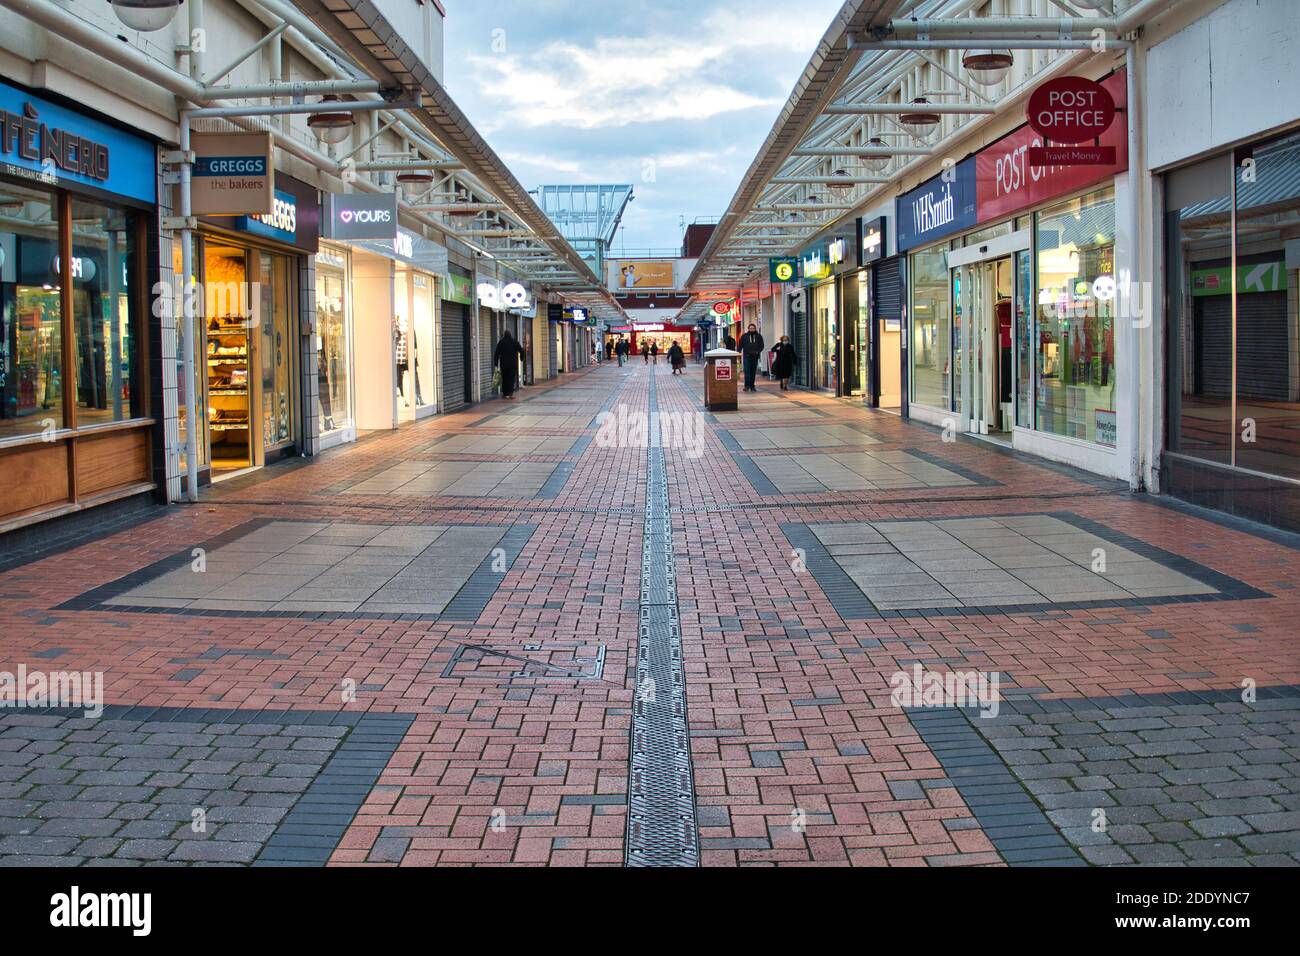 An almost deserted urban shopping mall pictured during the England autumn lockdown in November 2020. Essential shops are open, but most are closed. Stock Photo